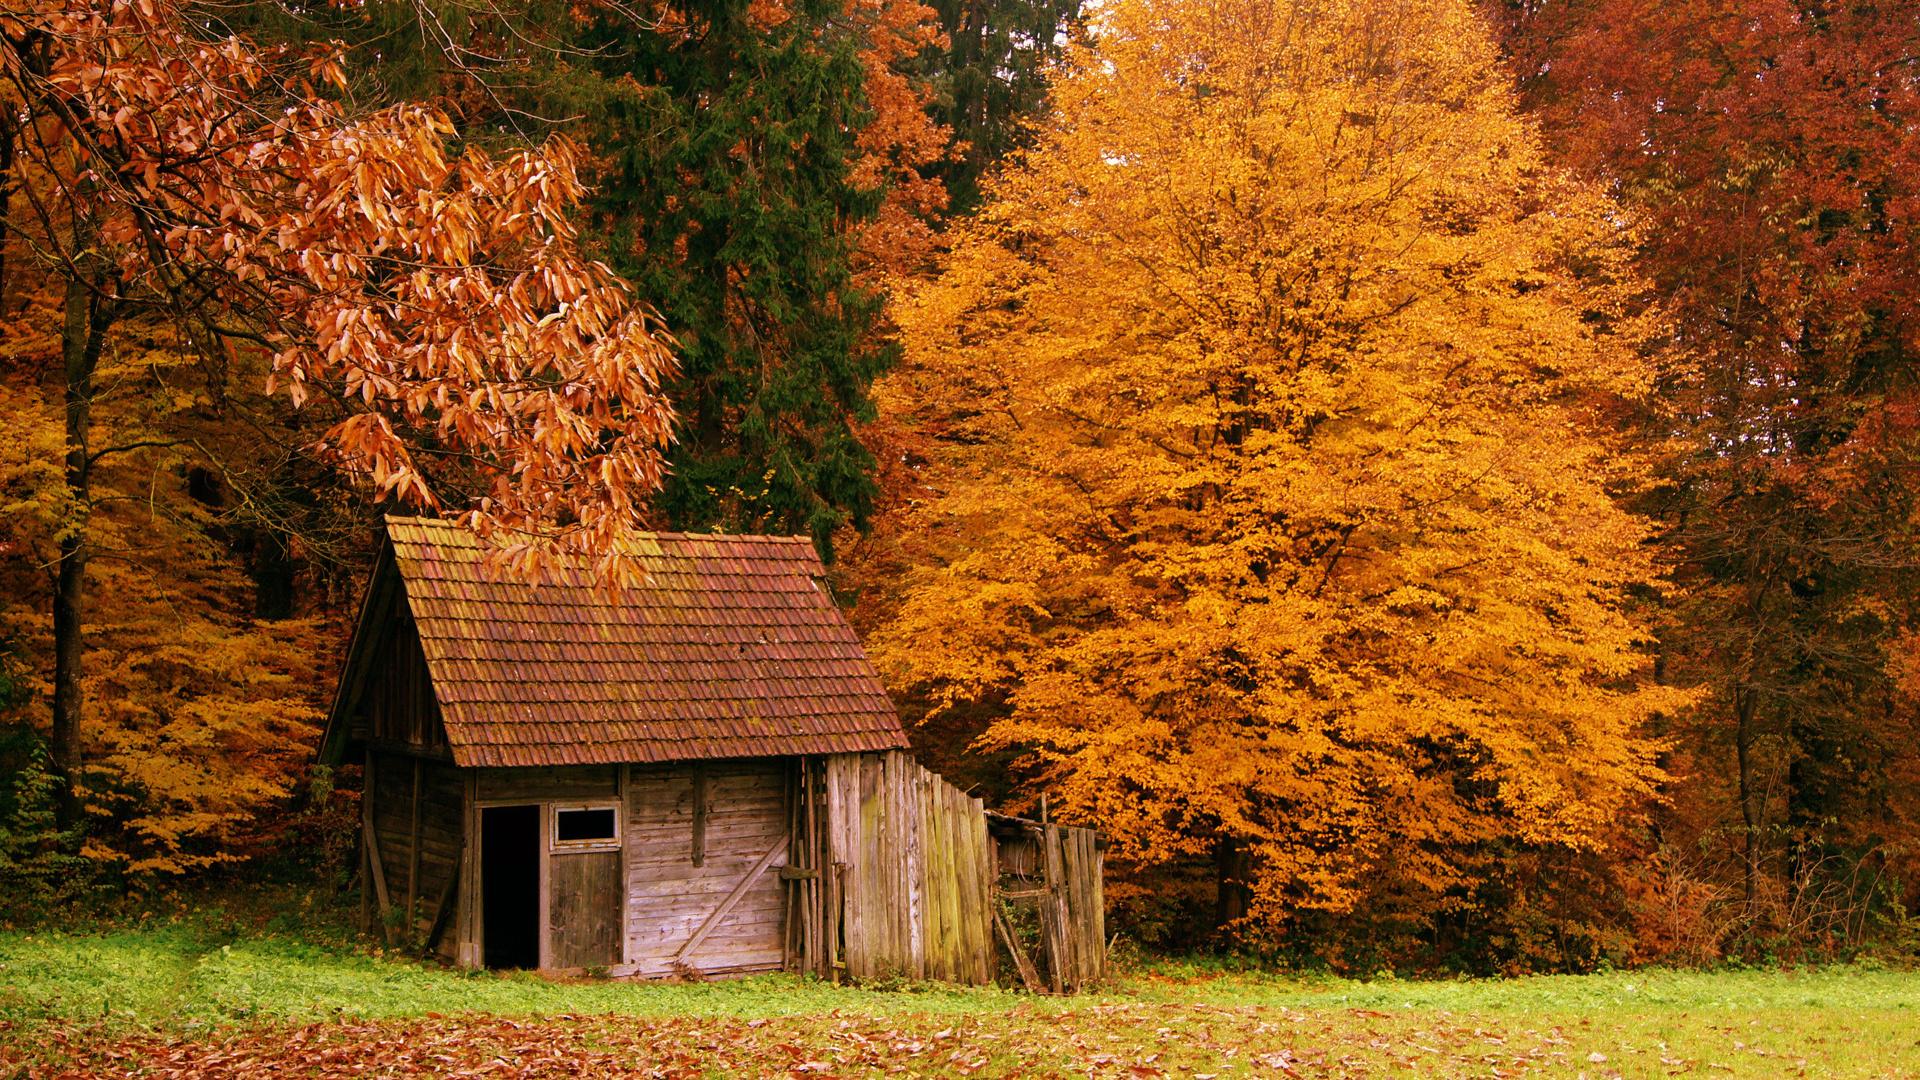 The Cabin In Autumn Woods HD Wallpaper